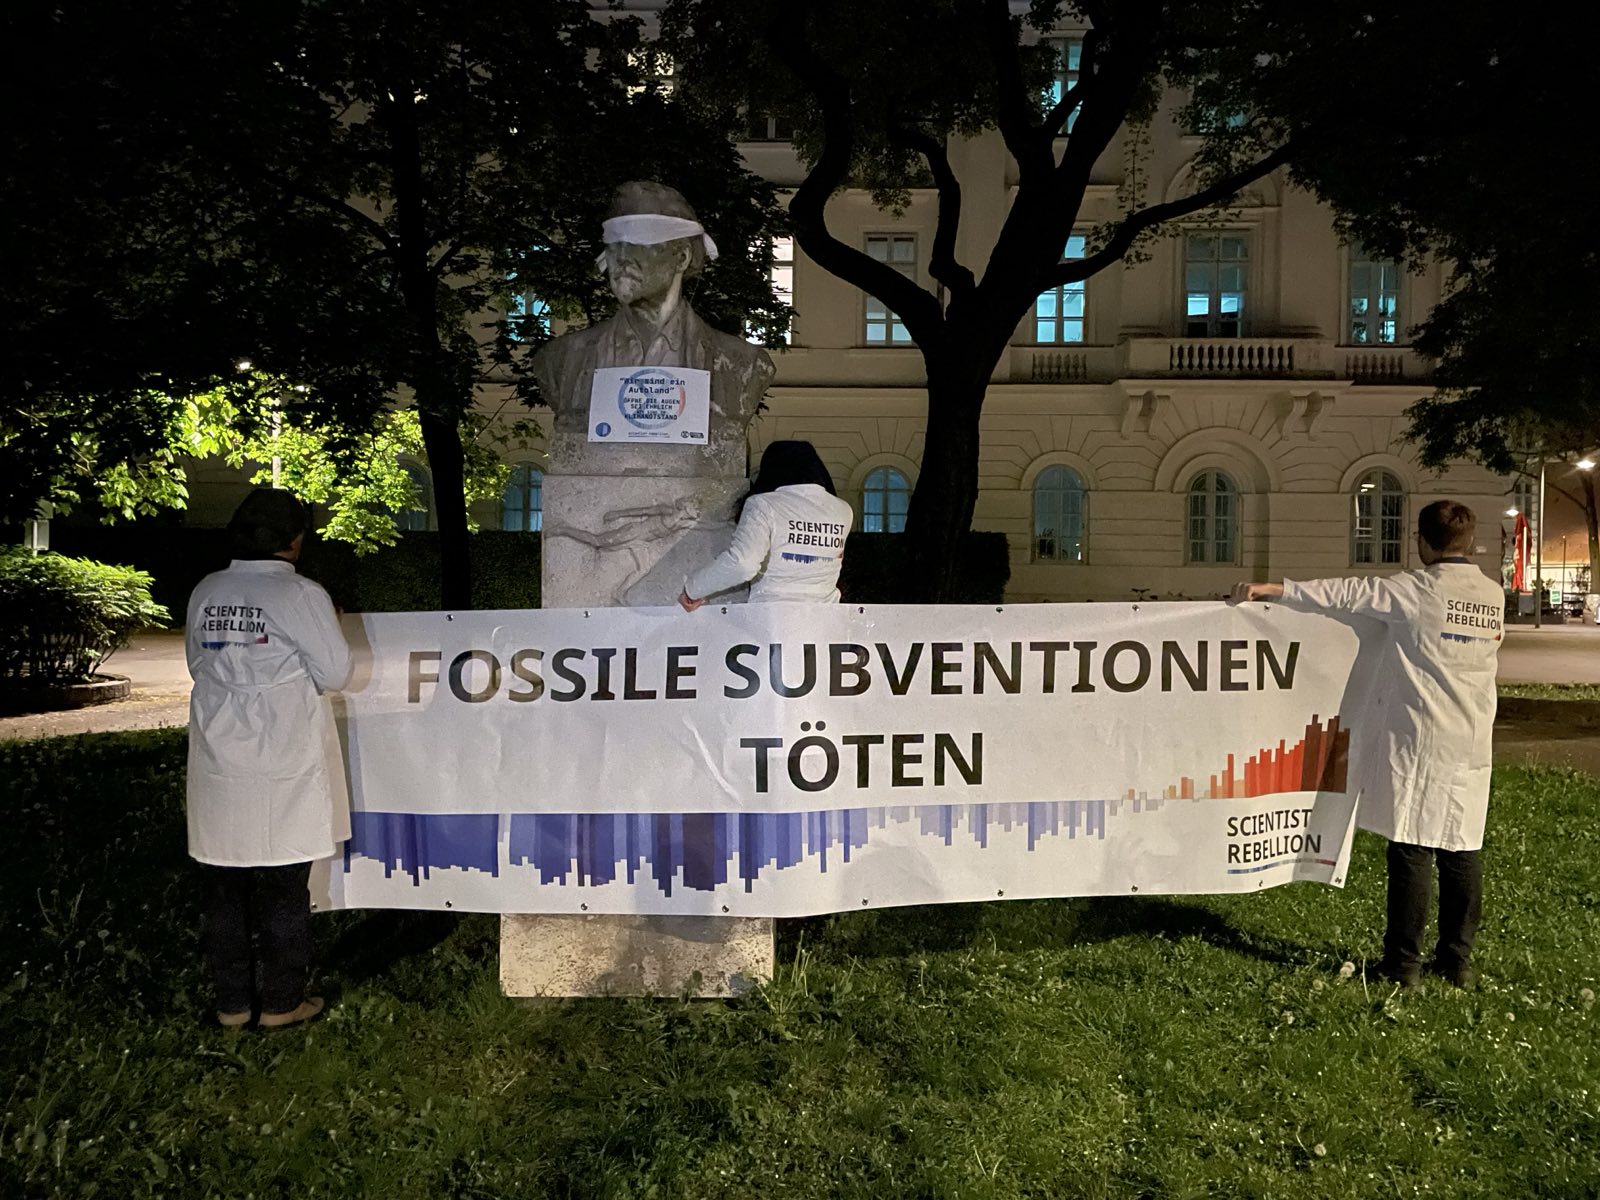 At night, two people dressed in lab coats hold a banner in front a blindfolded statue. The banner says in German that fossil subsidies kill.